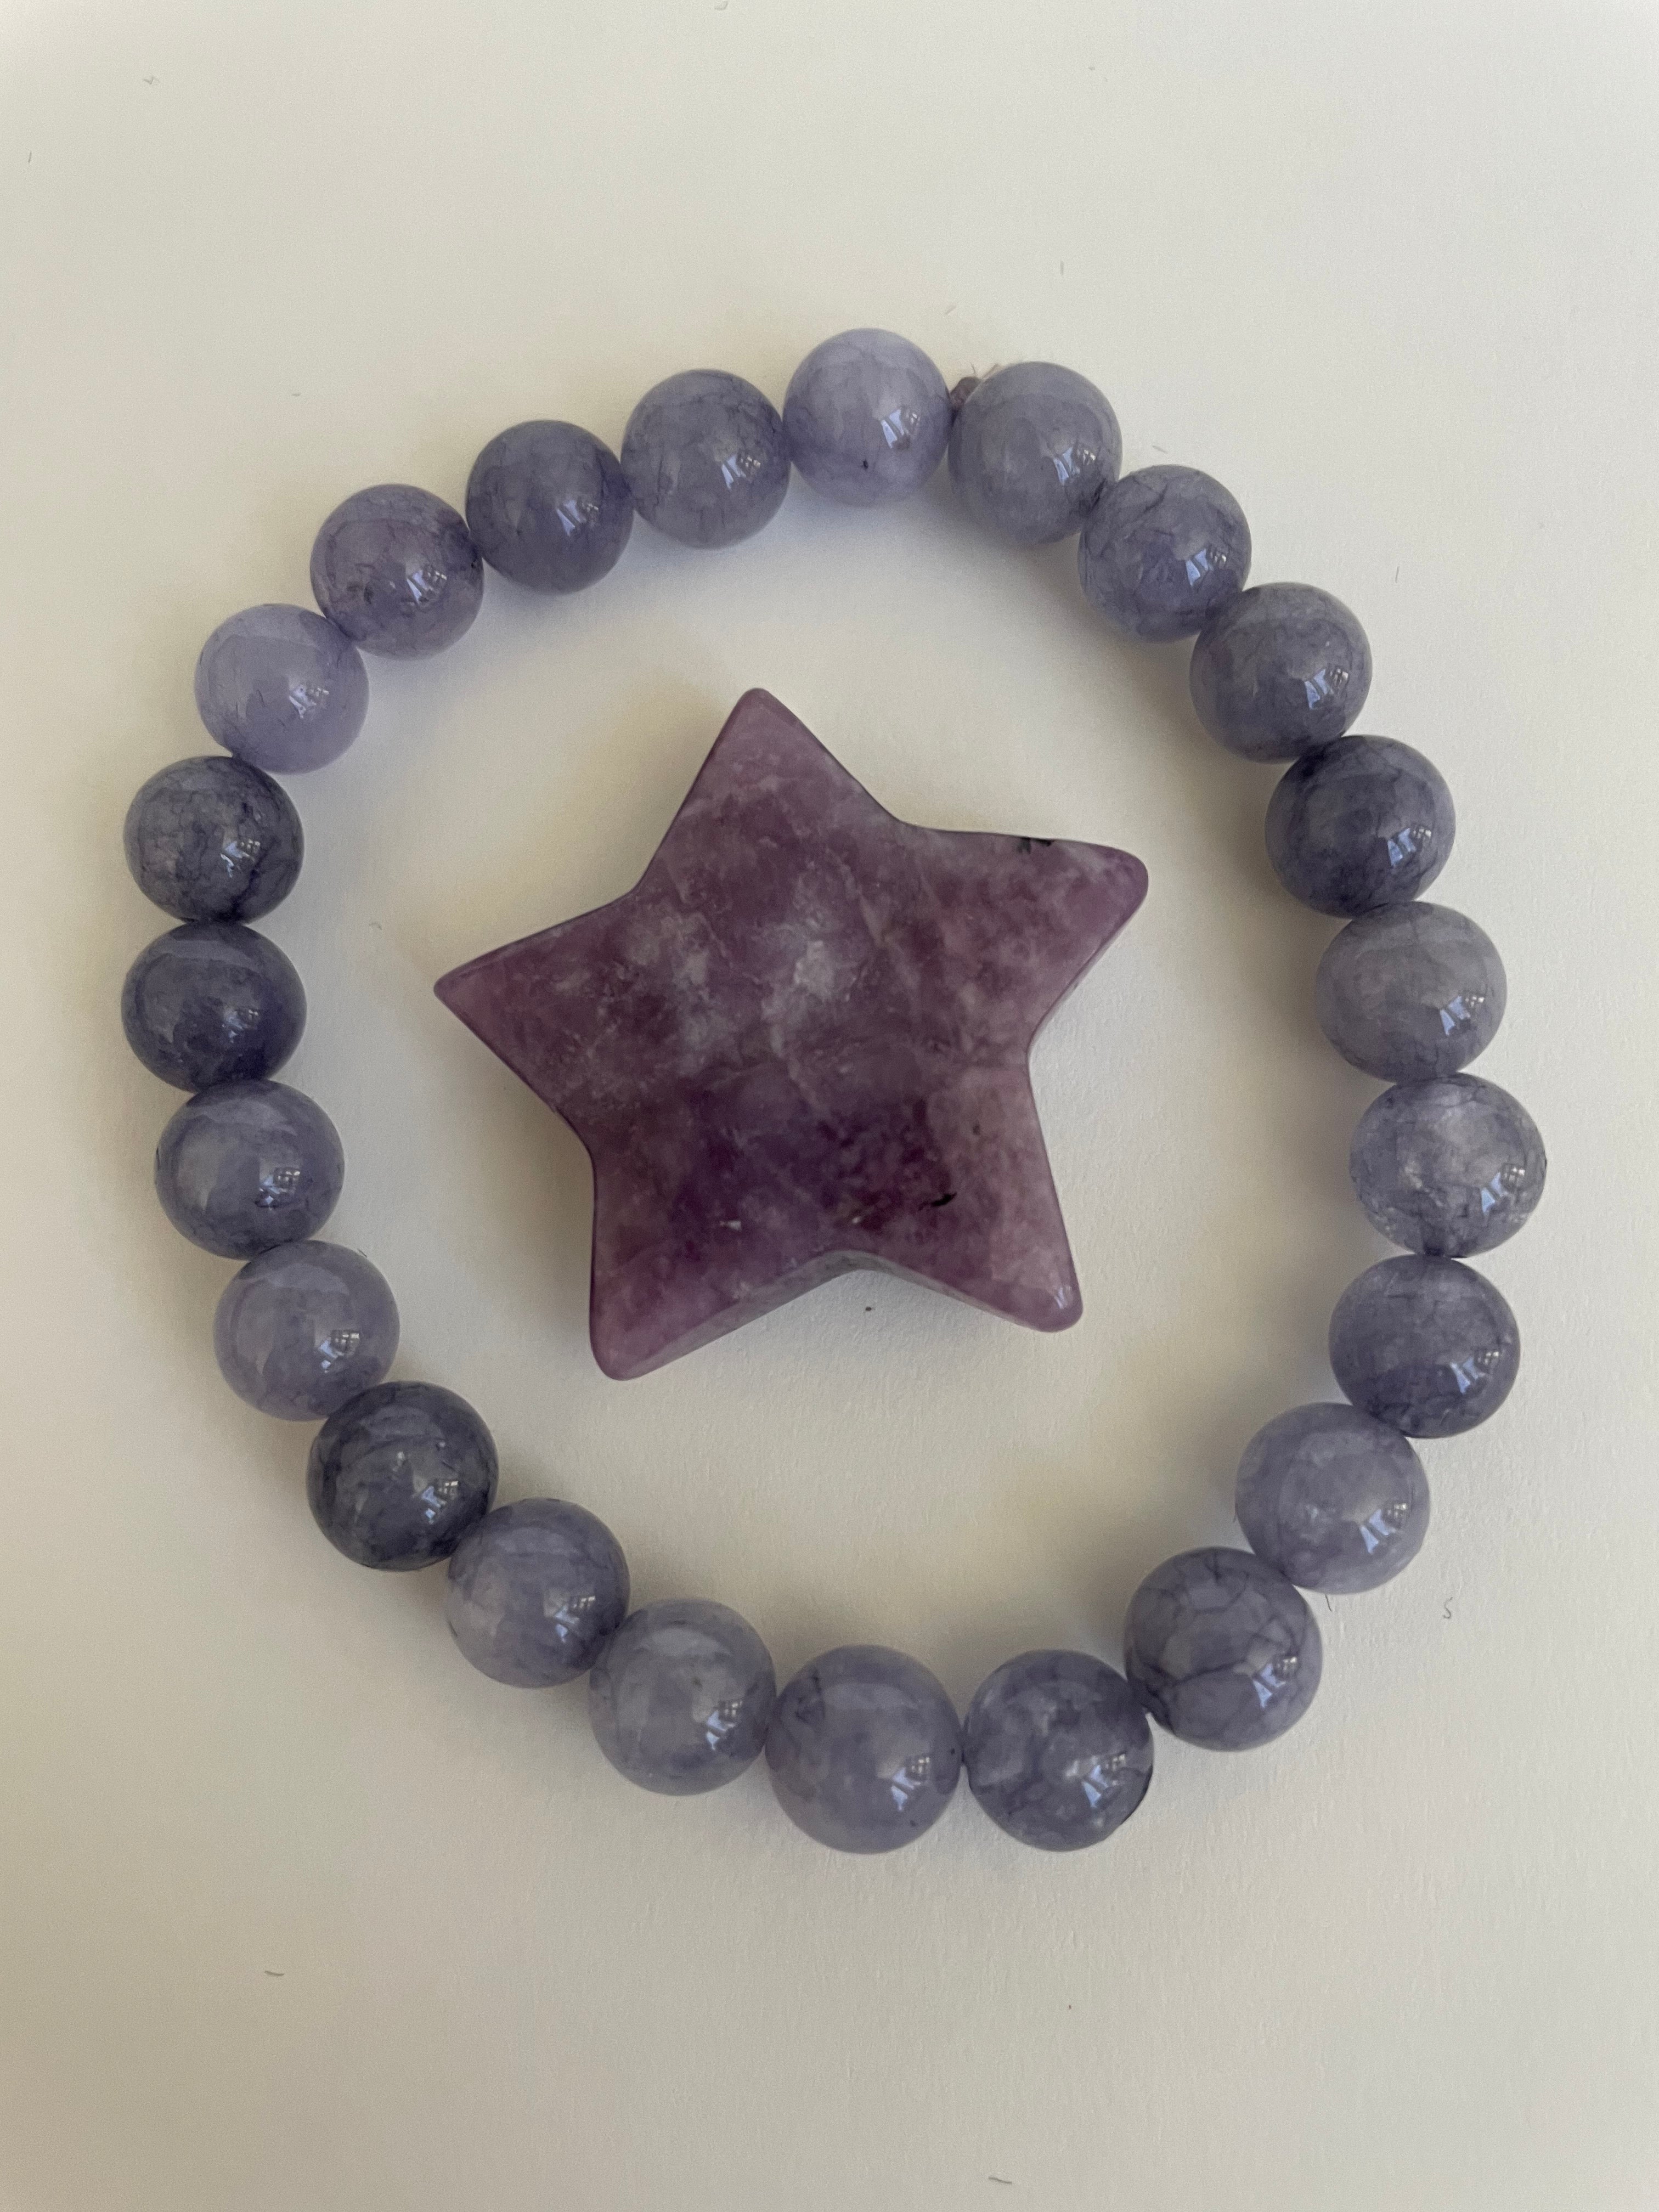 Reverse side of lepidolite star. This lovely little Lepidolite star can be used for meditation, healing, for your altar, on your computer to clear EMRs, or as décor for any room in your home or office. Easy to slip right into your pocket so you can take the energy of lepidolite everywhere you go. Approximately 1¼". Cost is $6.